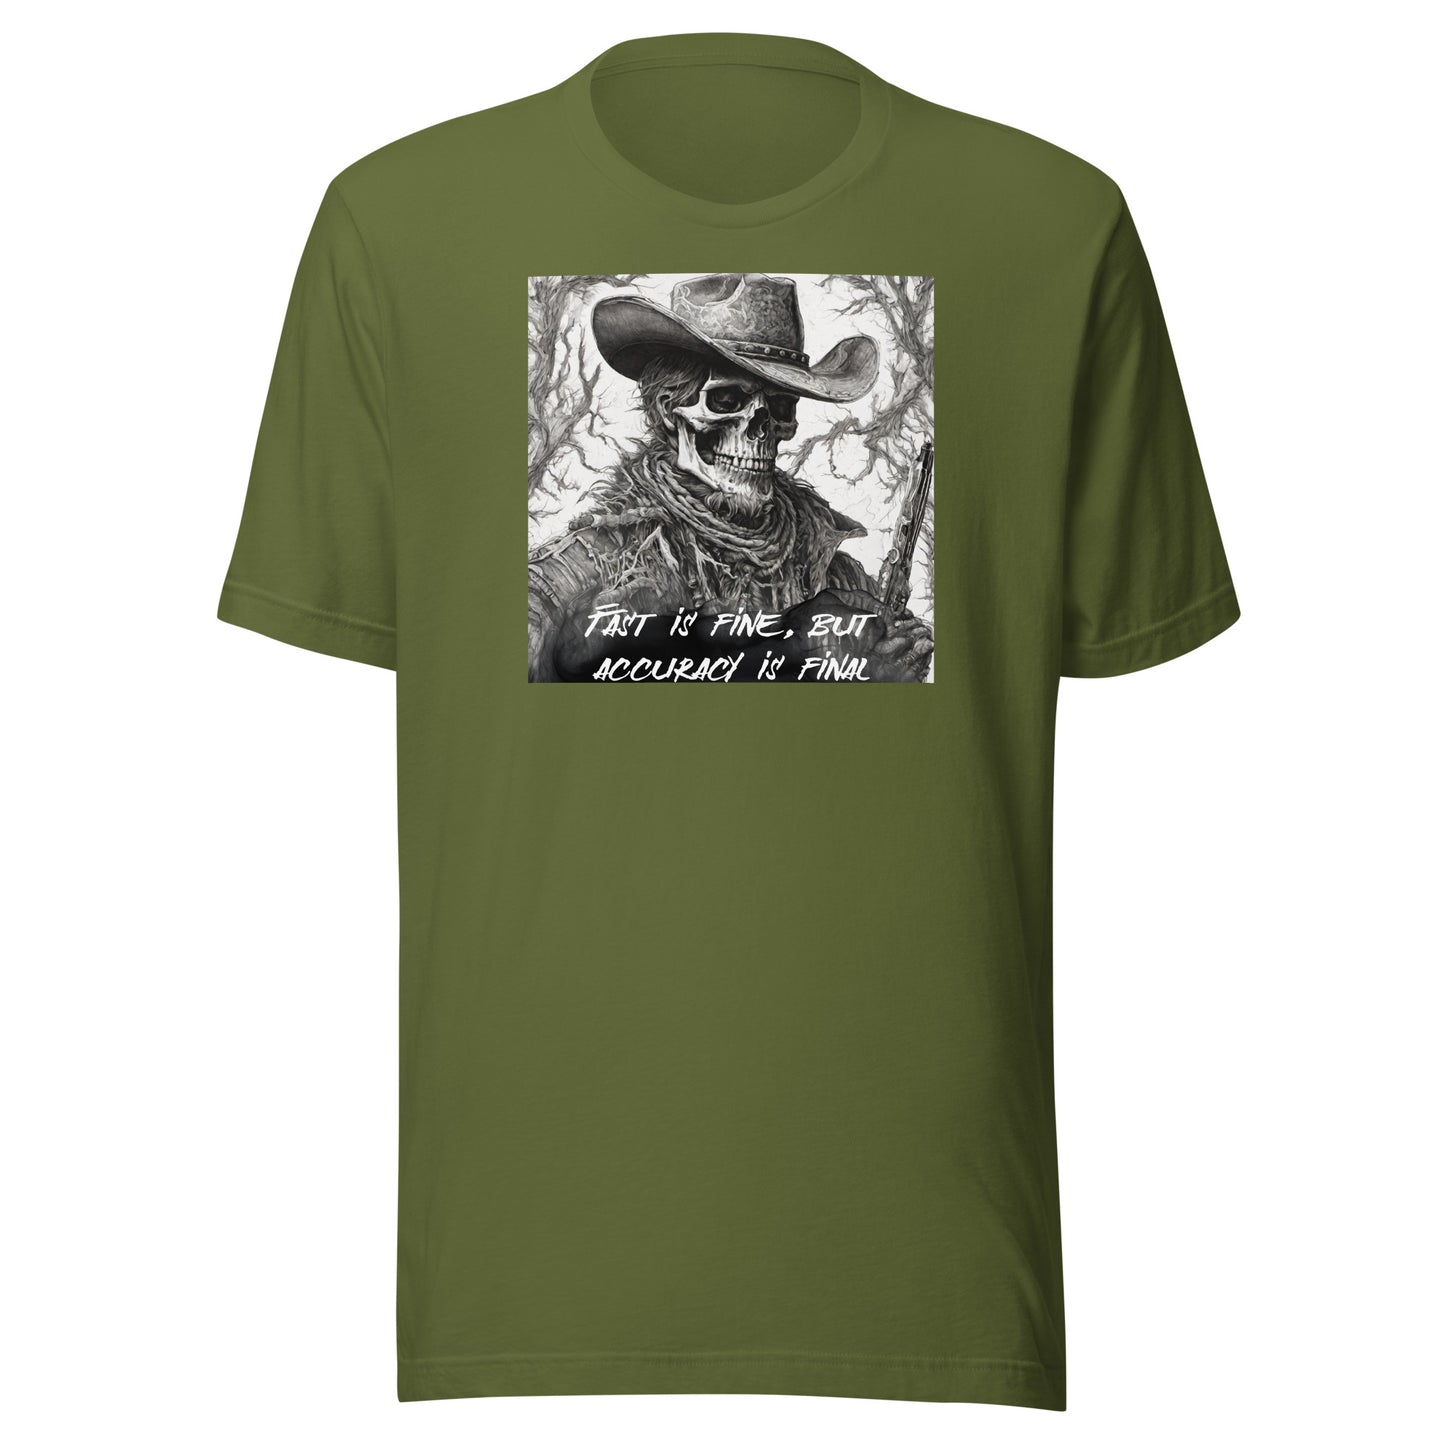 Accuracy is Final Men's T-Shirt Olive